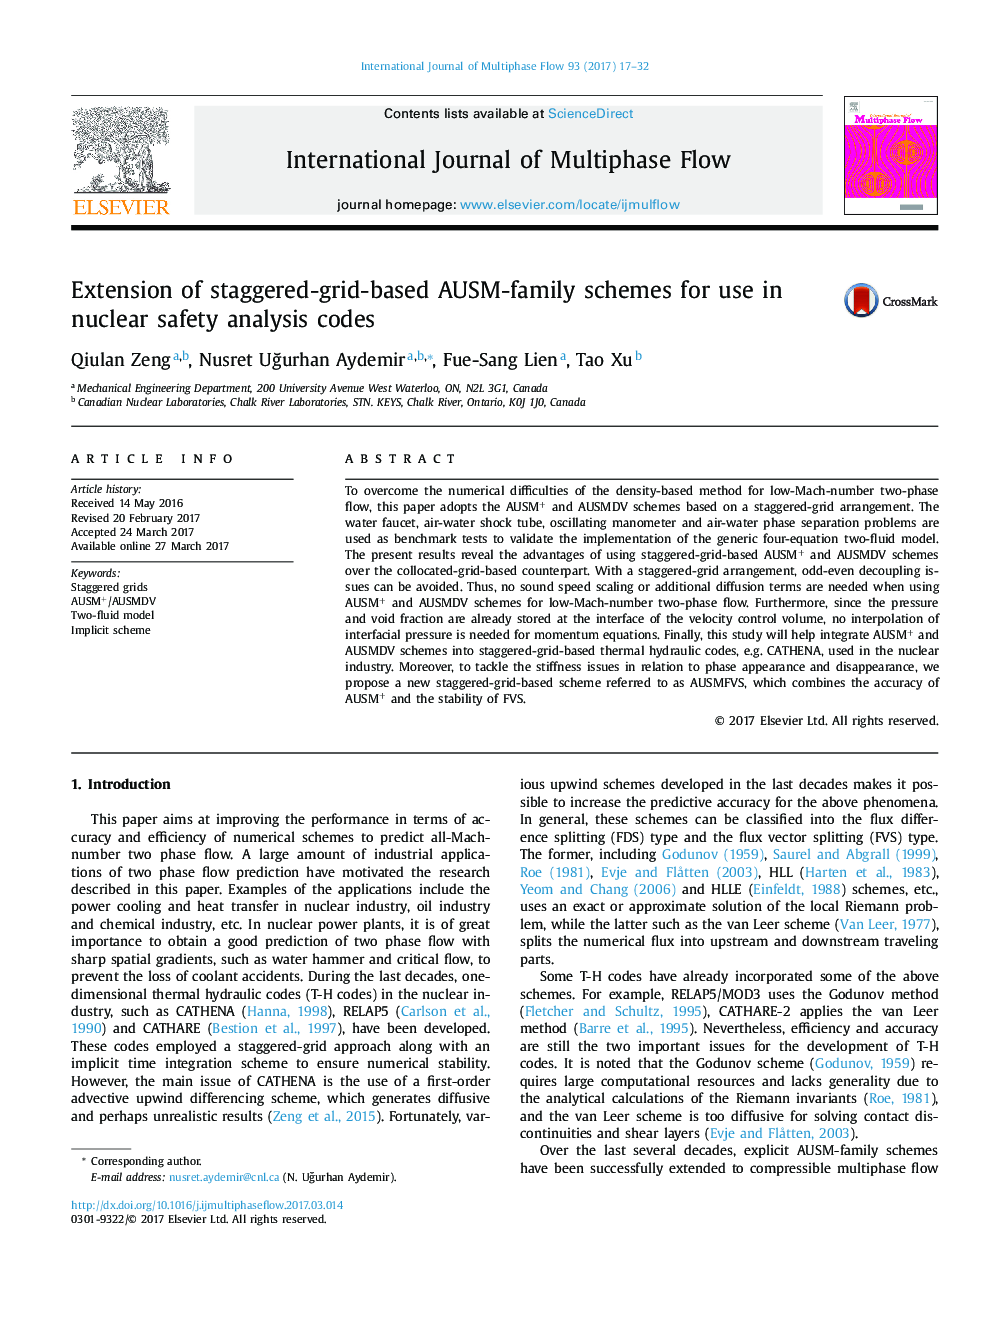 Extension of staggered-grid-based AUSM-family schemes for use in nuclear safety analysis codes